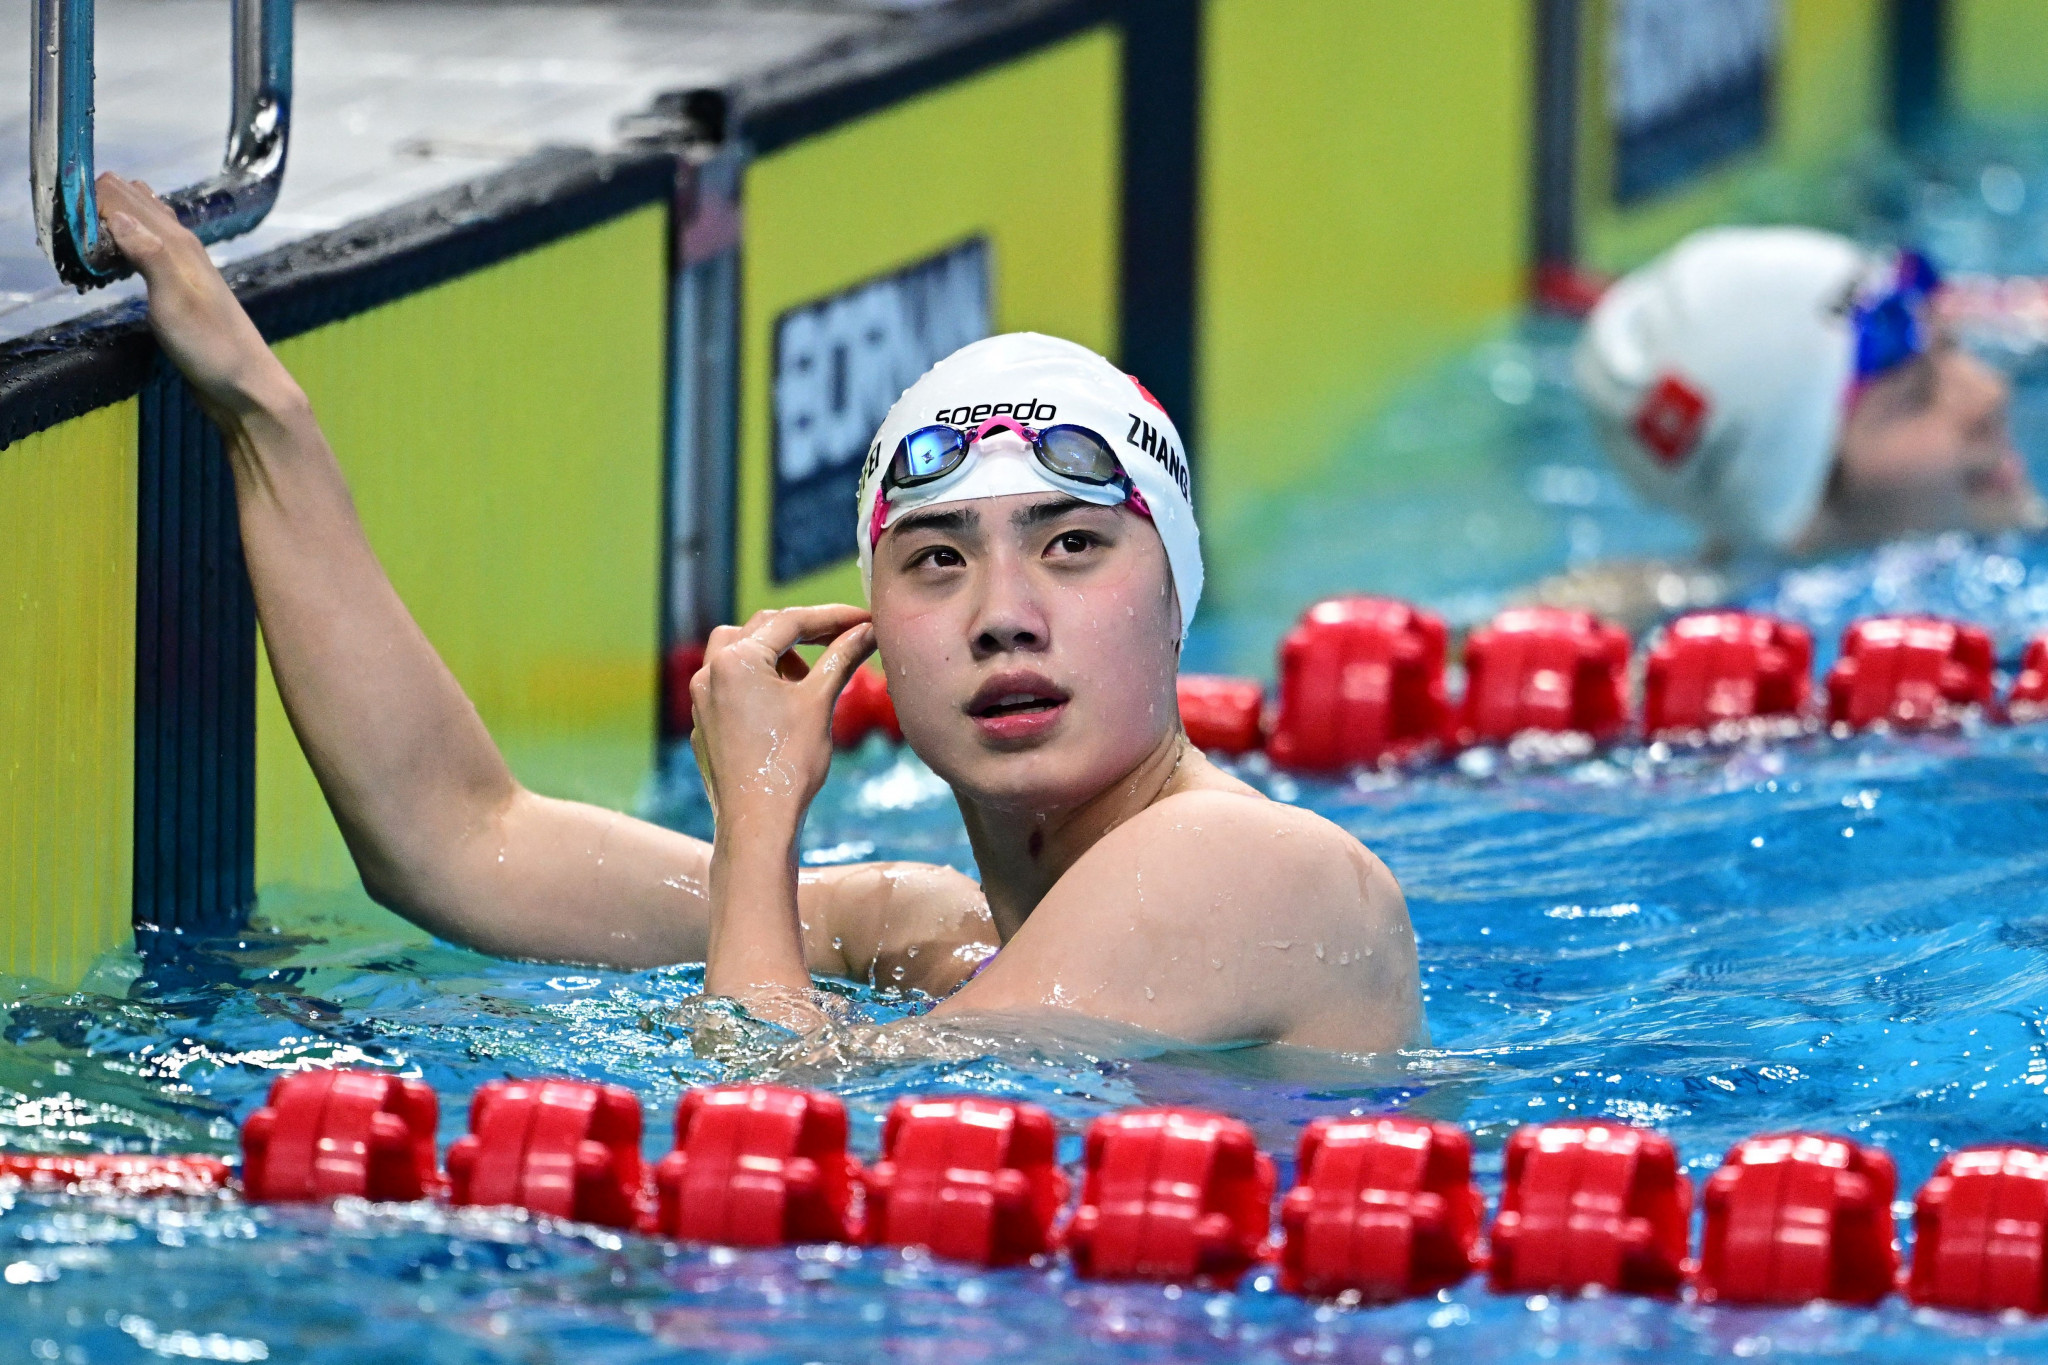 Zhang Yufei has won five gold medals at Hangzhou 2022 after winning the women’s 50m freestyle title ©Getty Images